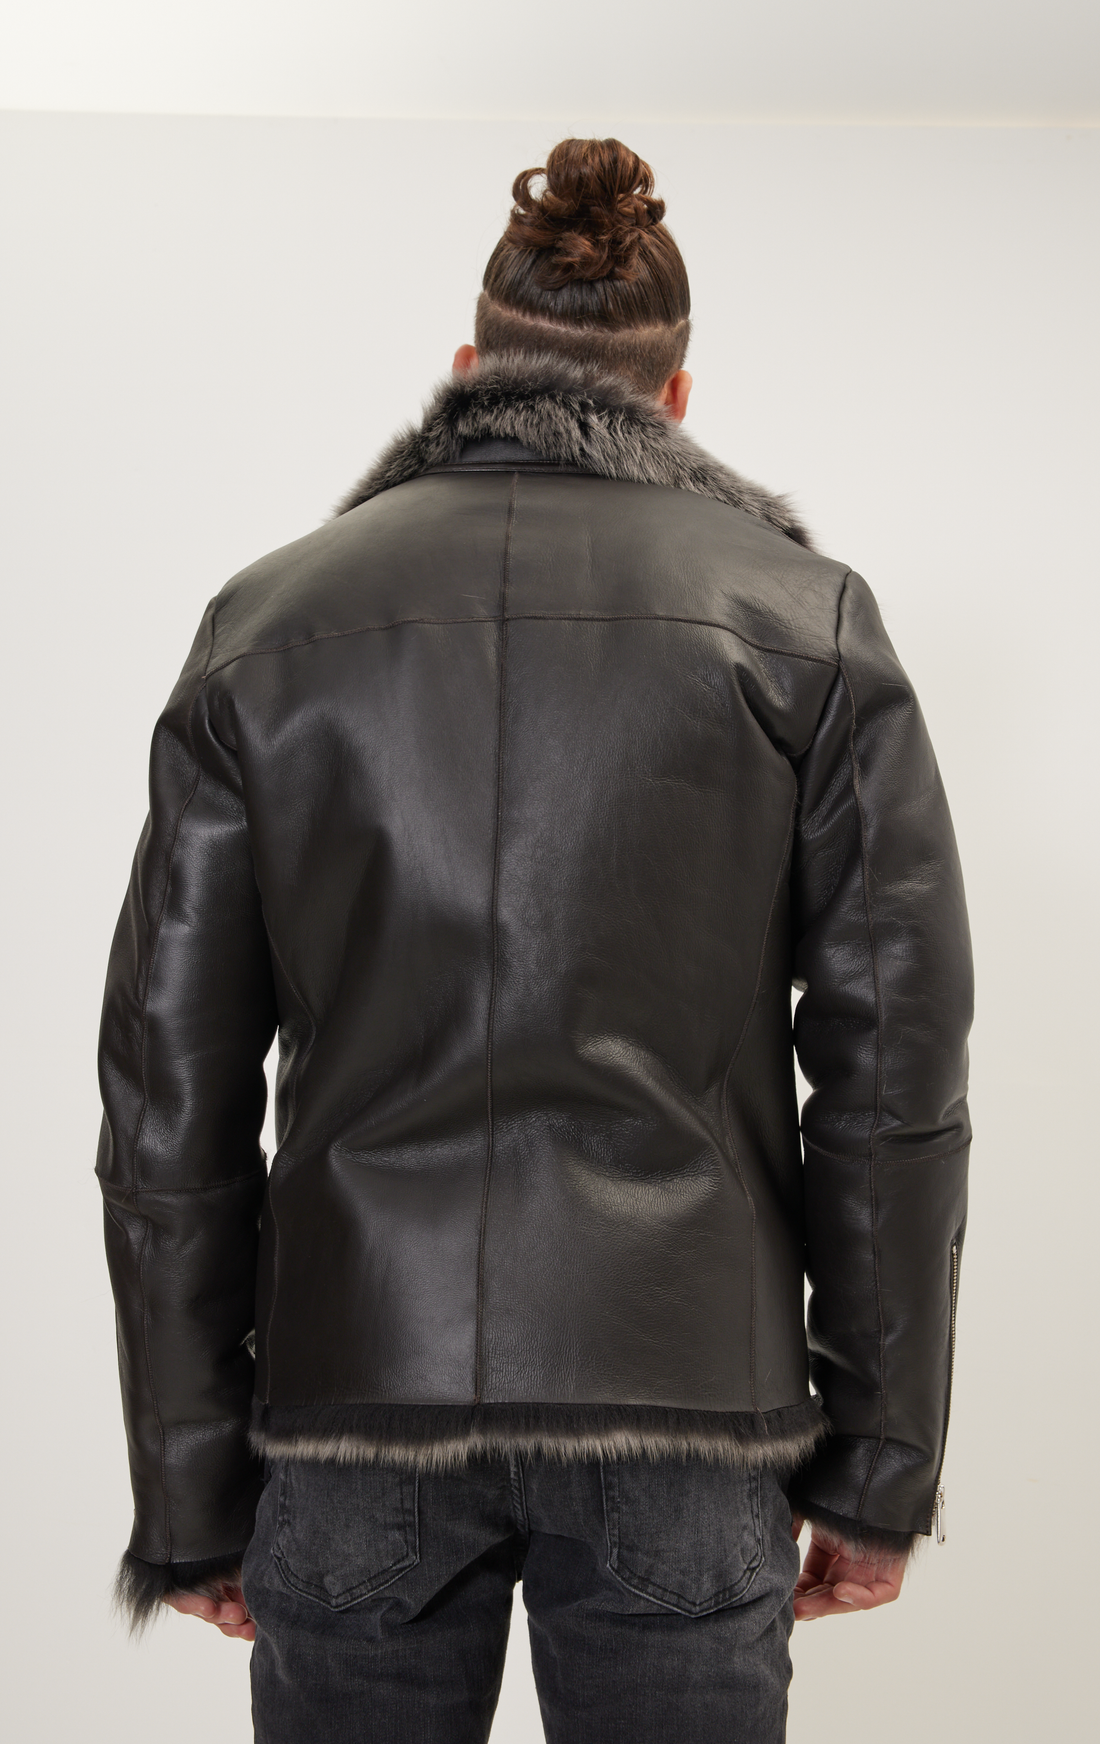 N° 73070 Reversible TOSCANA SHEARLING GENUINE LEATHER JACKET - CHOCOLATE